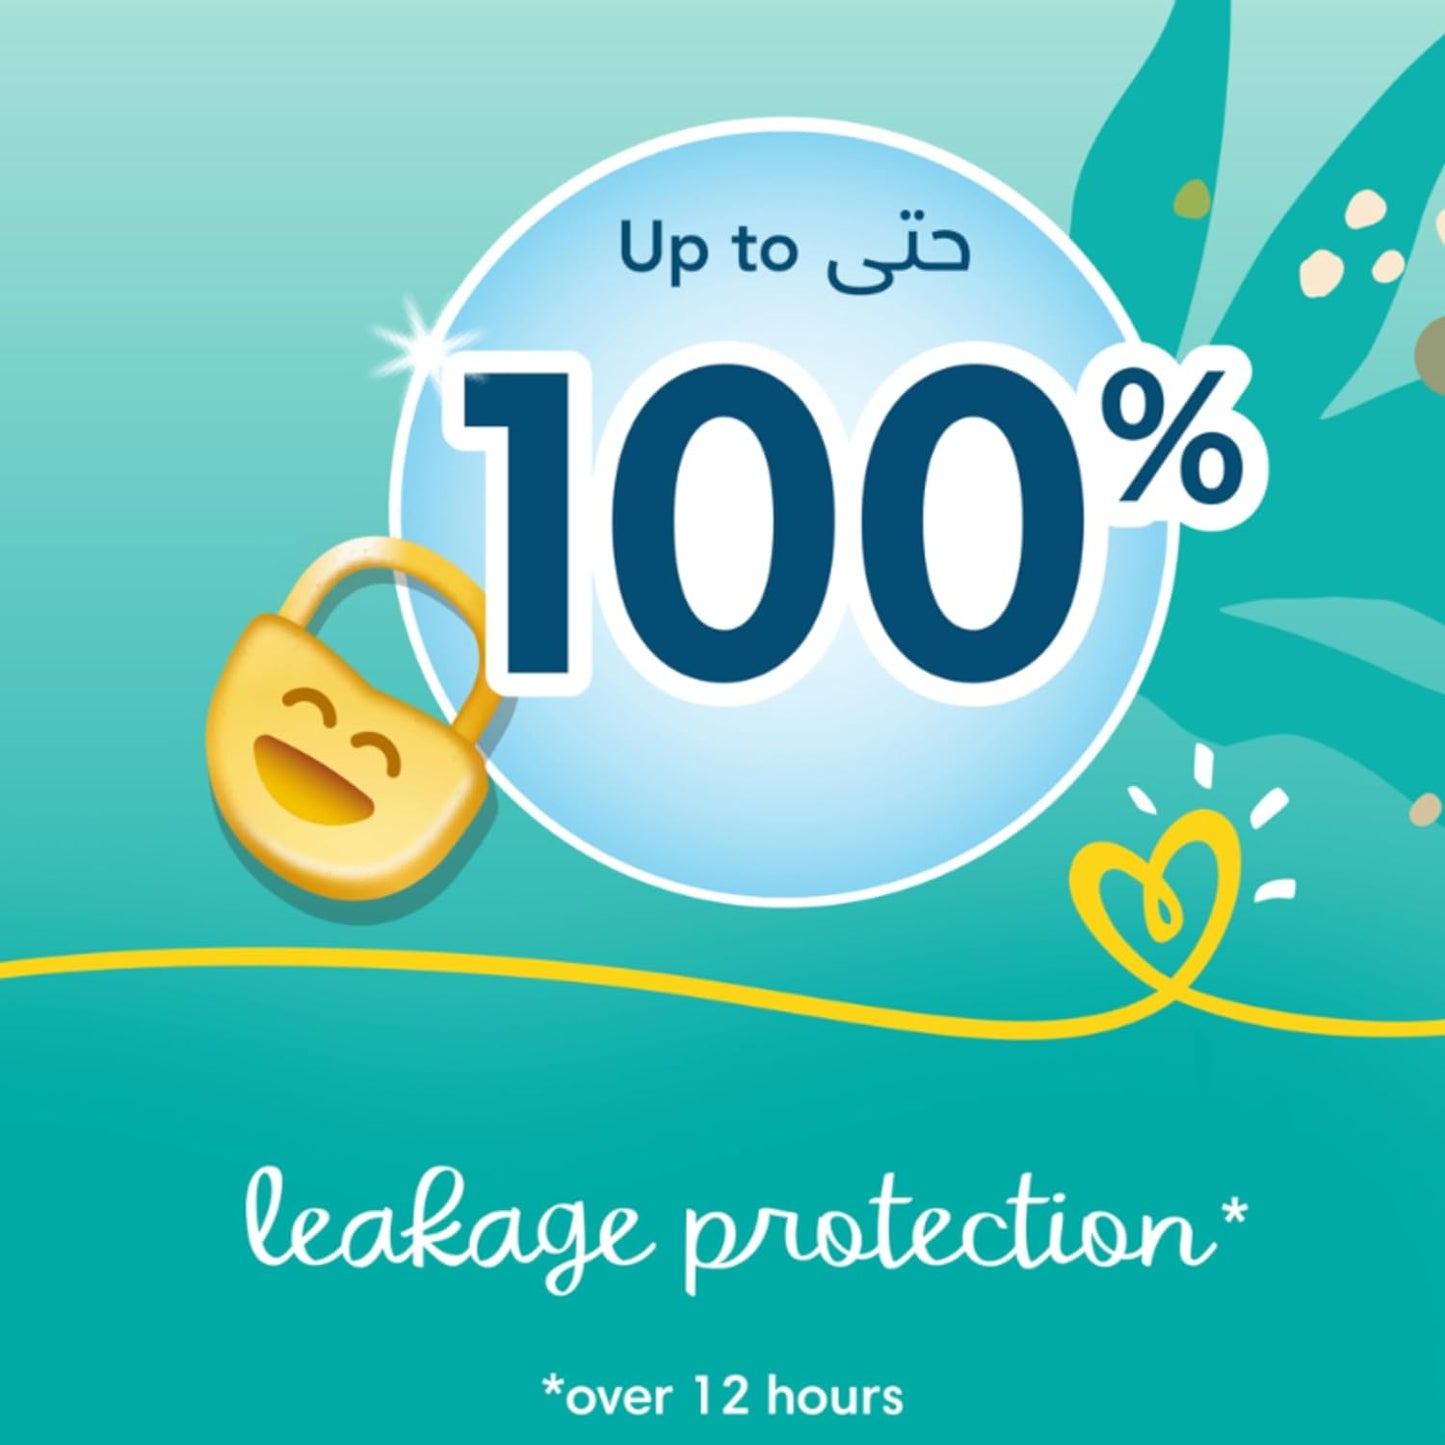 Pampers Baby-Dry Taped Diapers with Aloe Vera Lotion, up to 100% Leakage Protection, Size 5, 11-16kg, 104 Count - Laadlee